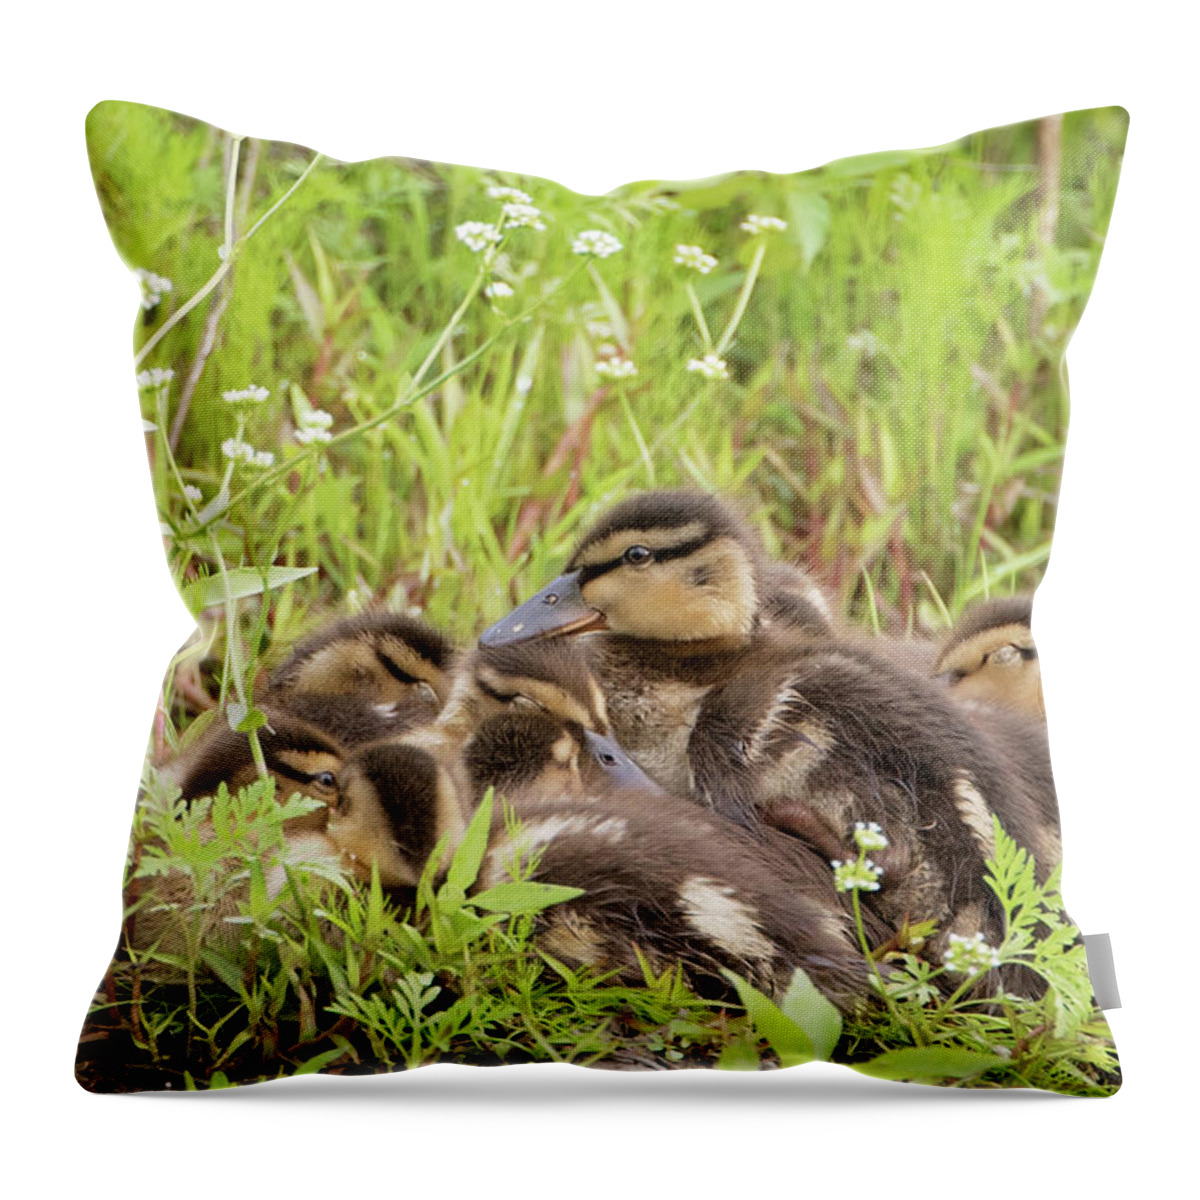 Duck Throw Pillow featuring the photograph Sleepy Ducklings by Eilish Palmer